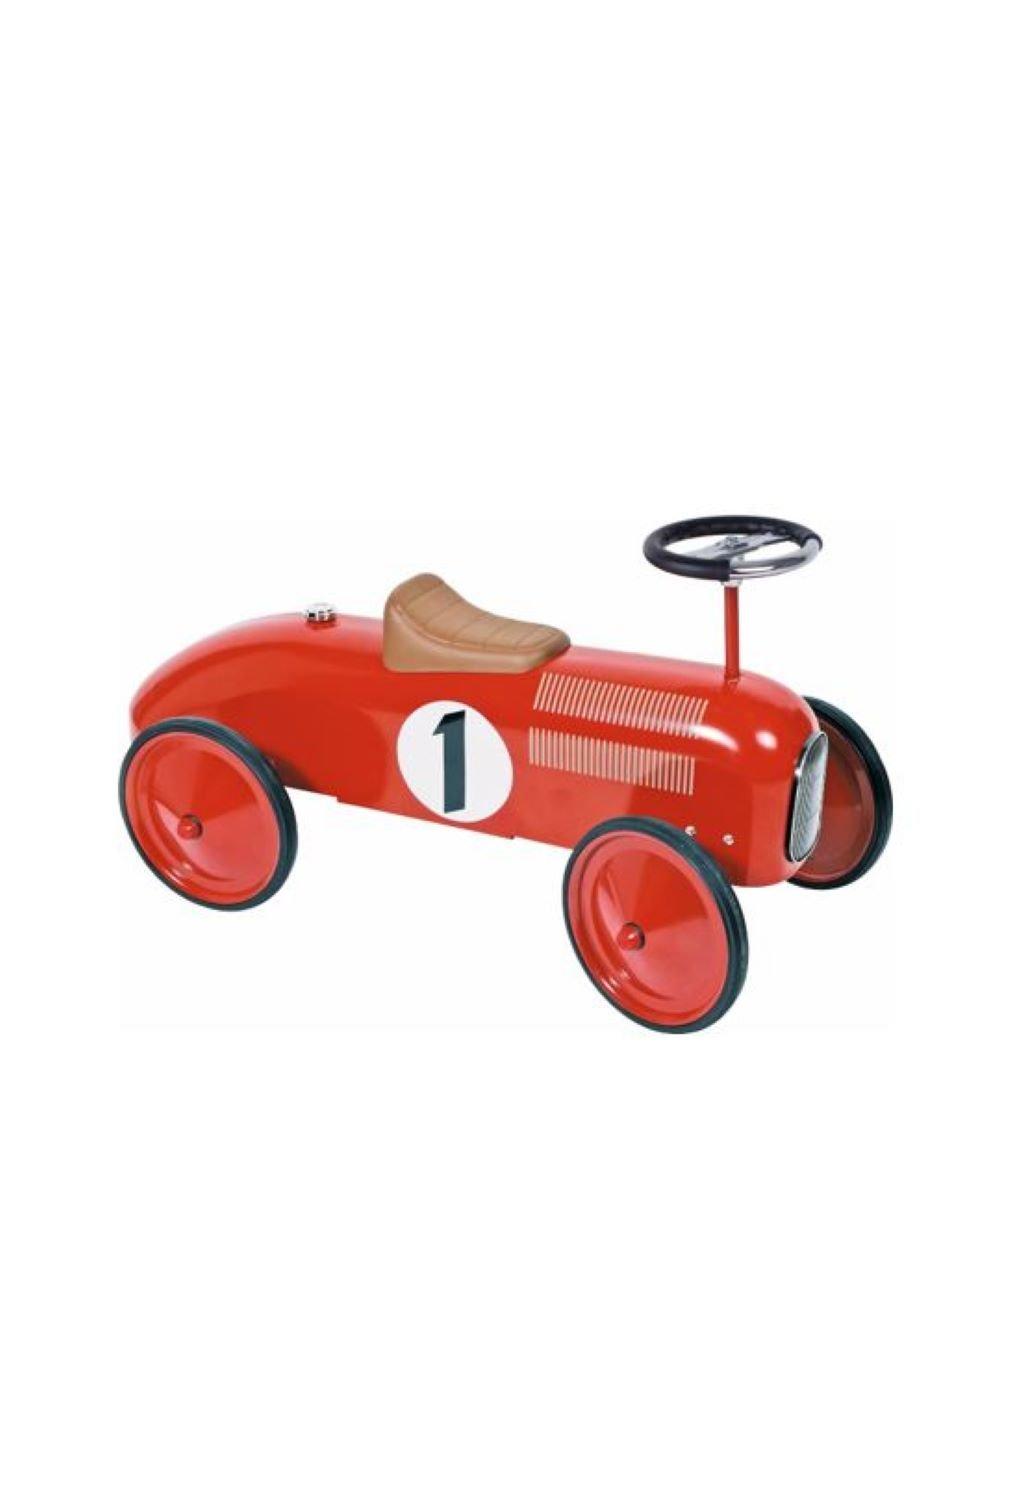 Ride-on vehicle red